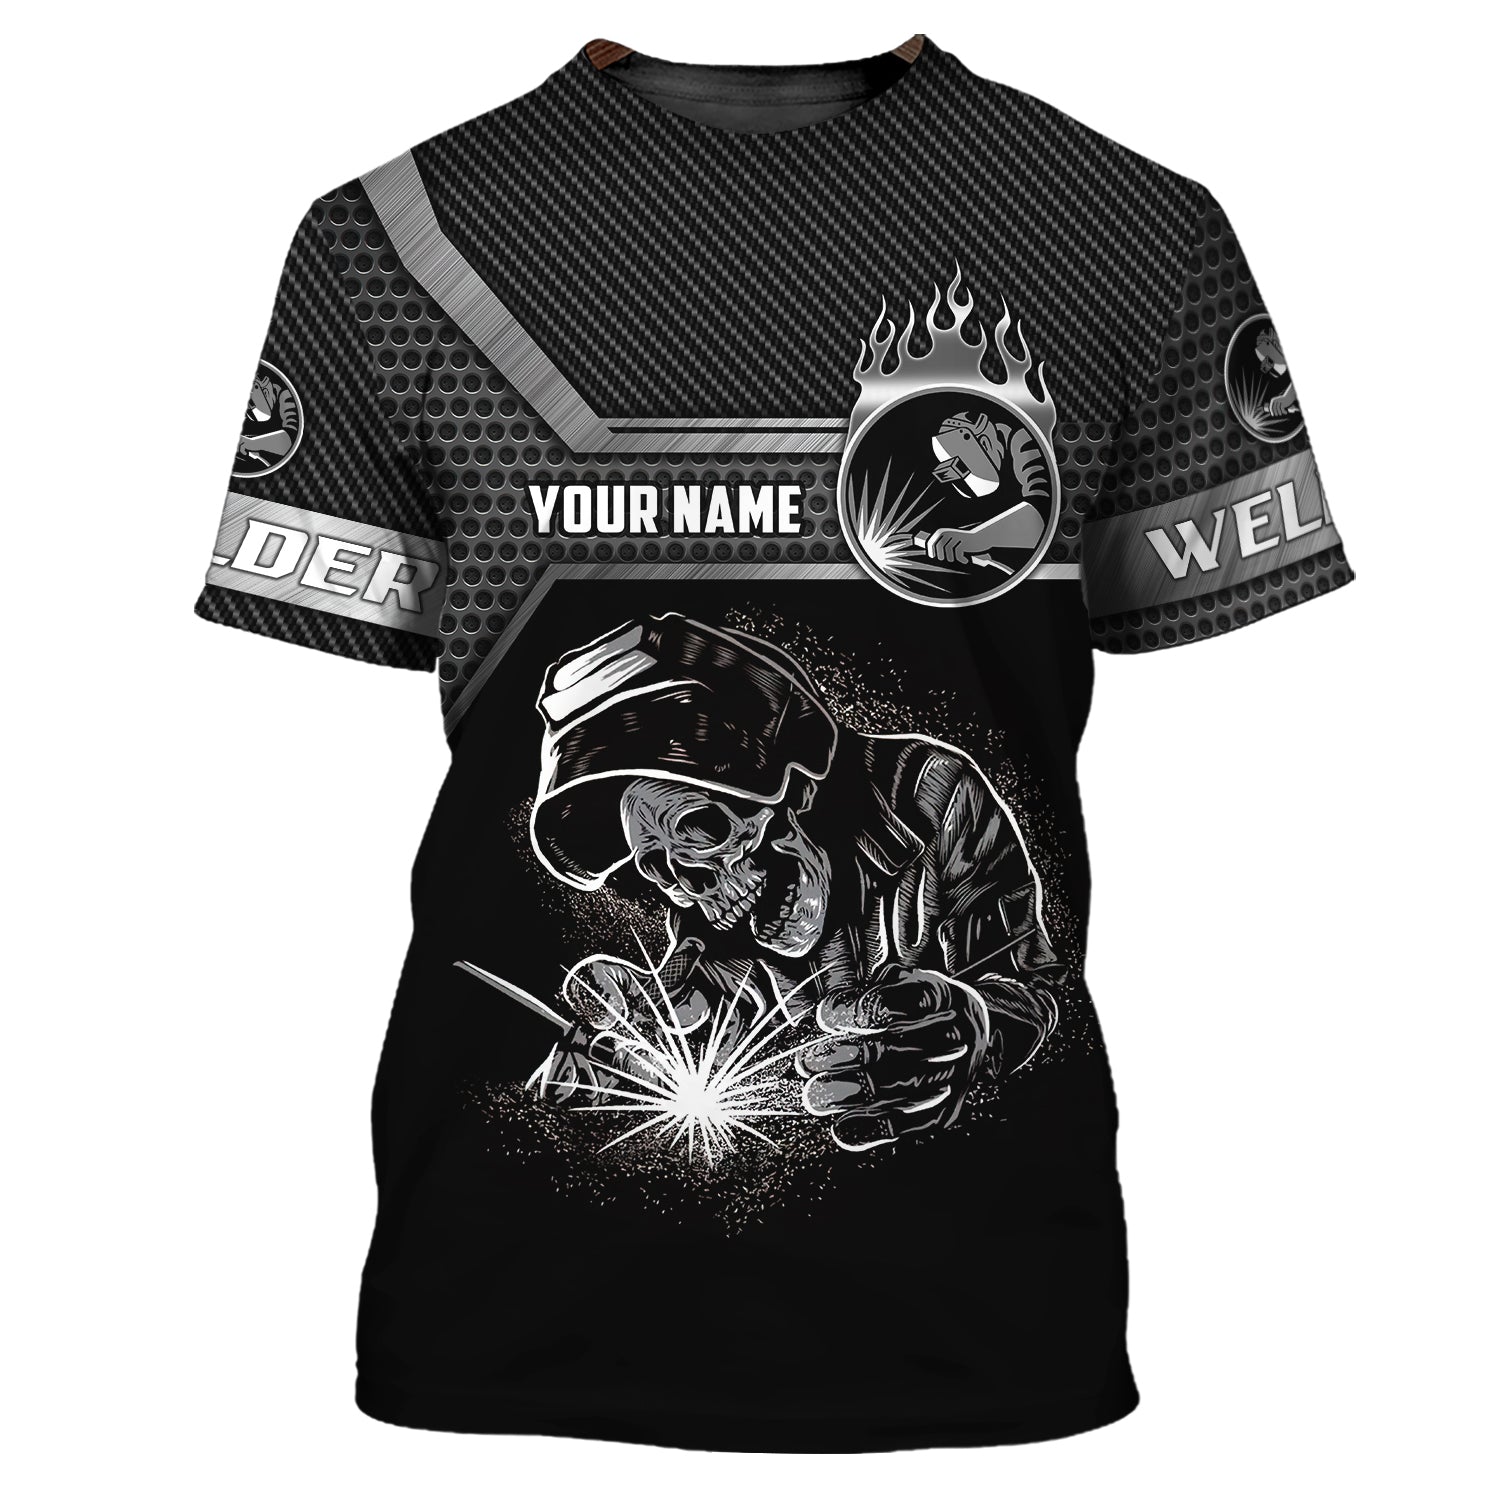 Welder I Said Watch Your Eyes 3D Shirts Personalized Name/ Funny Skull Welder Shirt